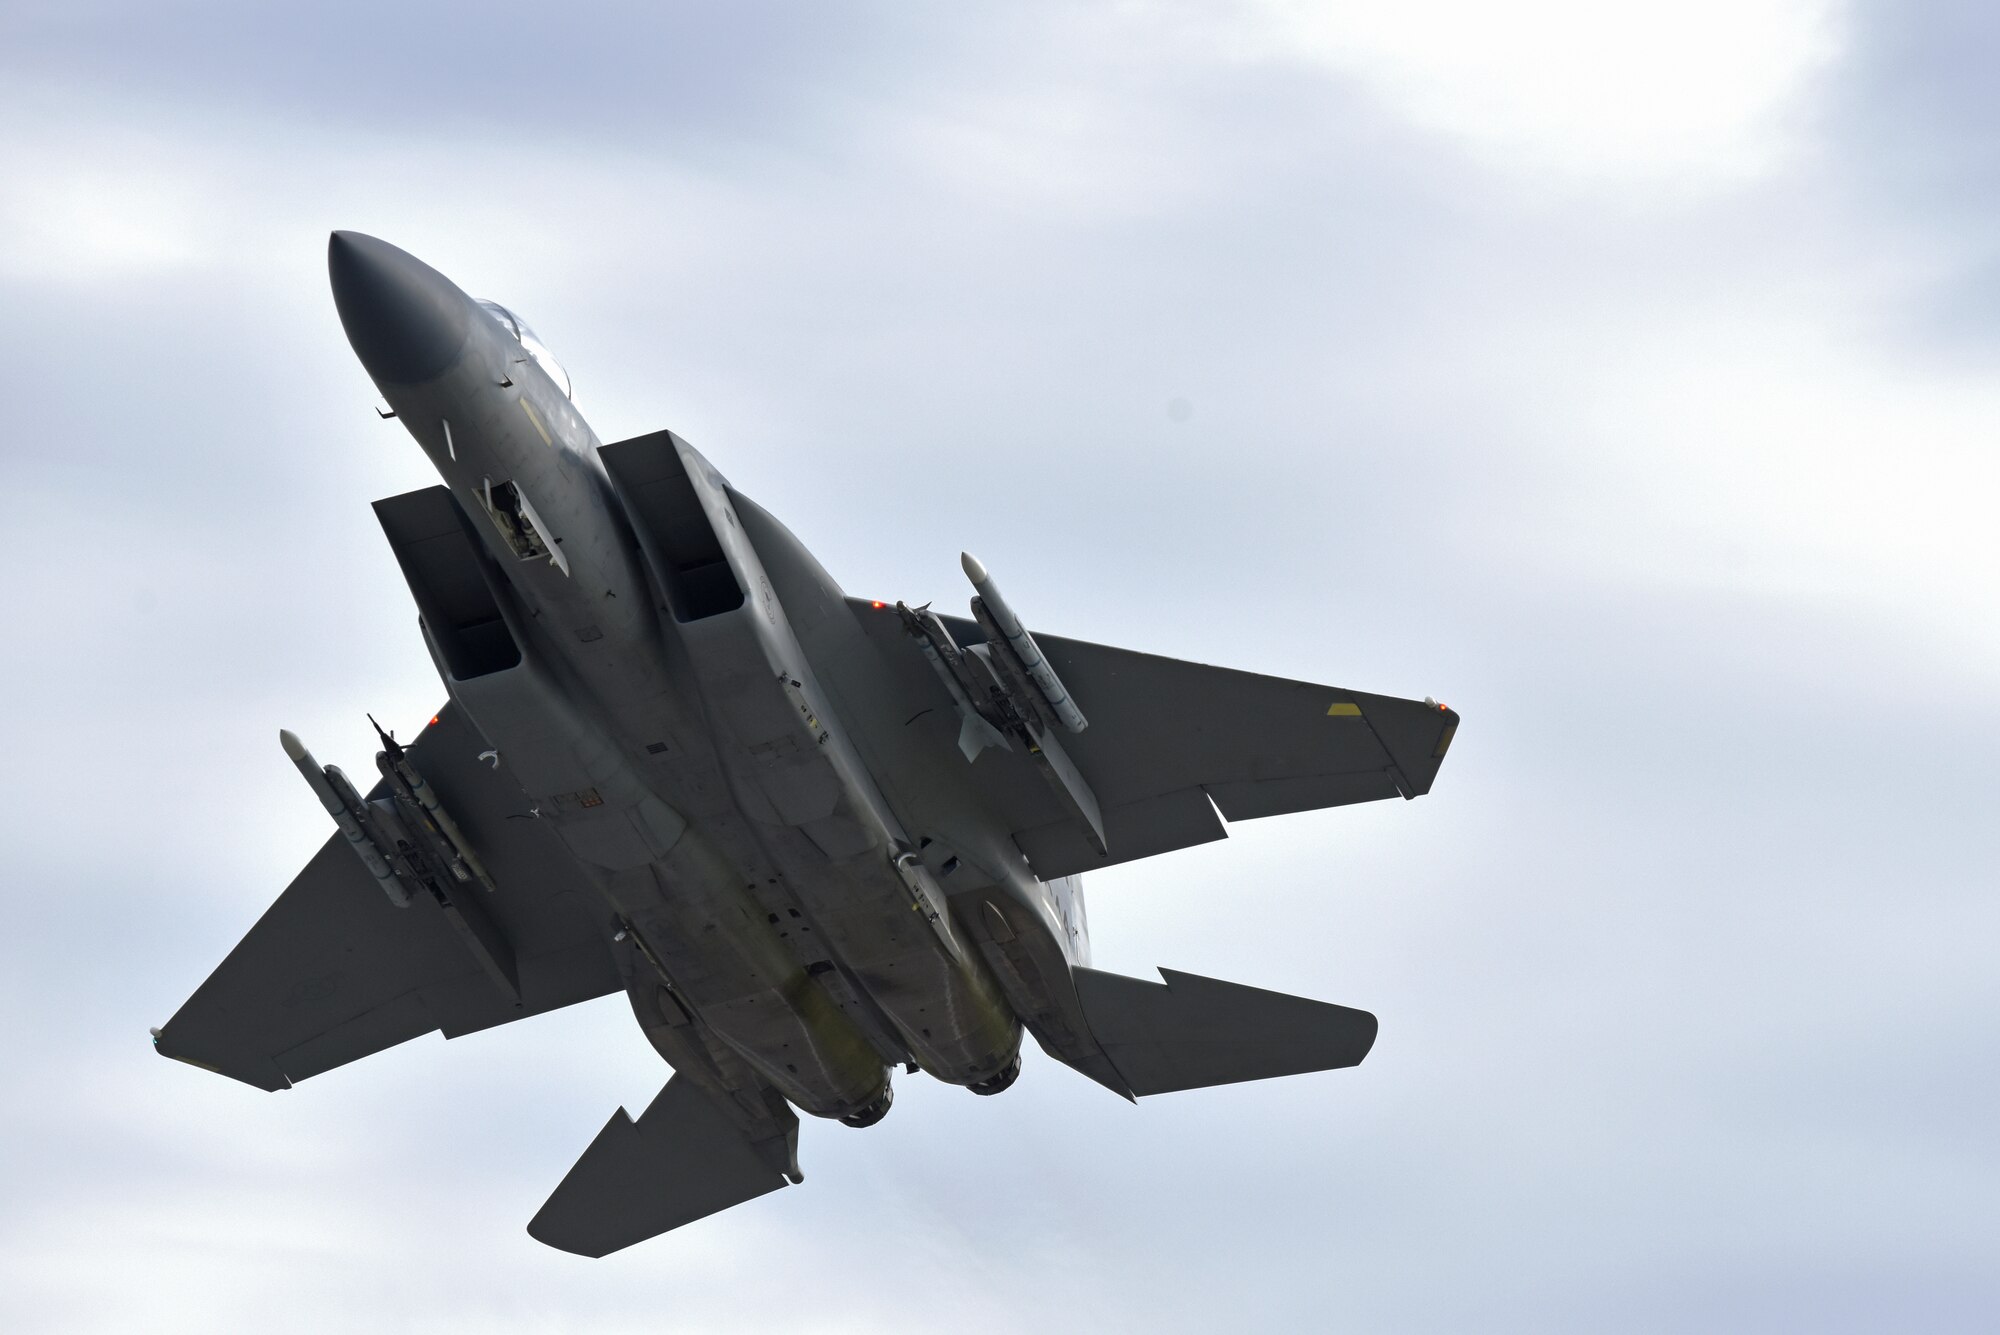 An F-15C Eagle assigned to the 493rd Fighter Squadron flies over Royal Air Force Lakenheath, England, July 23, 2020. To maintain proficiency, Liberty Wing aircrew perform daily training missions ensuring they are always ready to provide worldwide responsive combat airpower. (U.S. Air Force photo by Airman 1st Class Rhonda Smith)